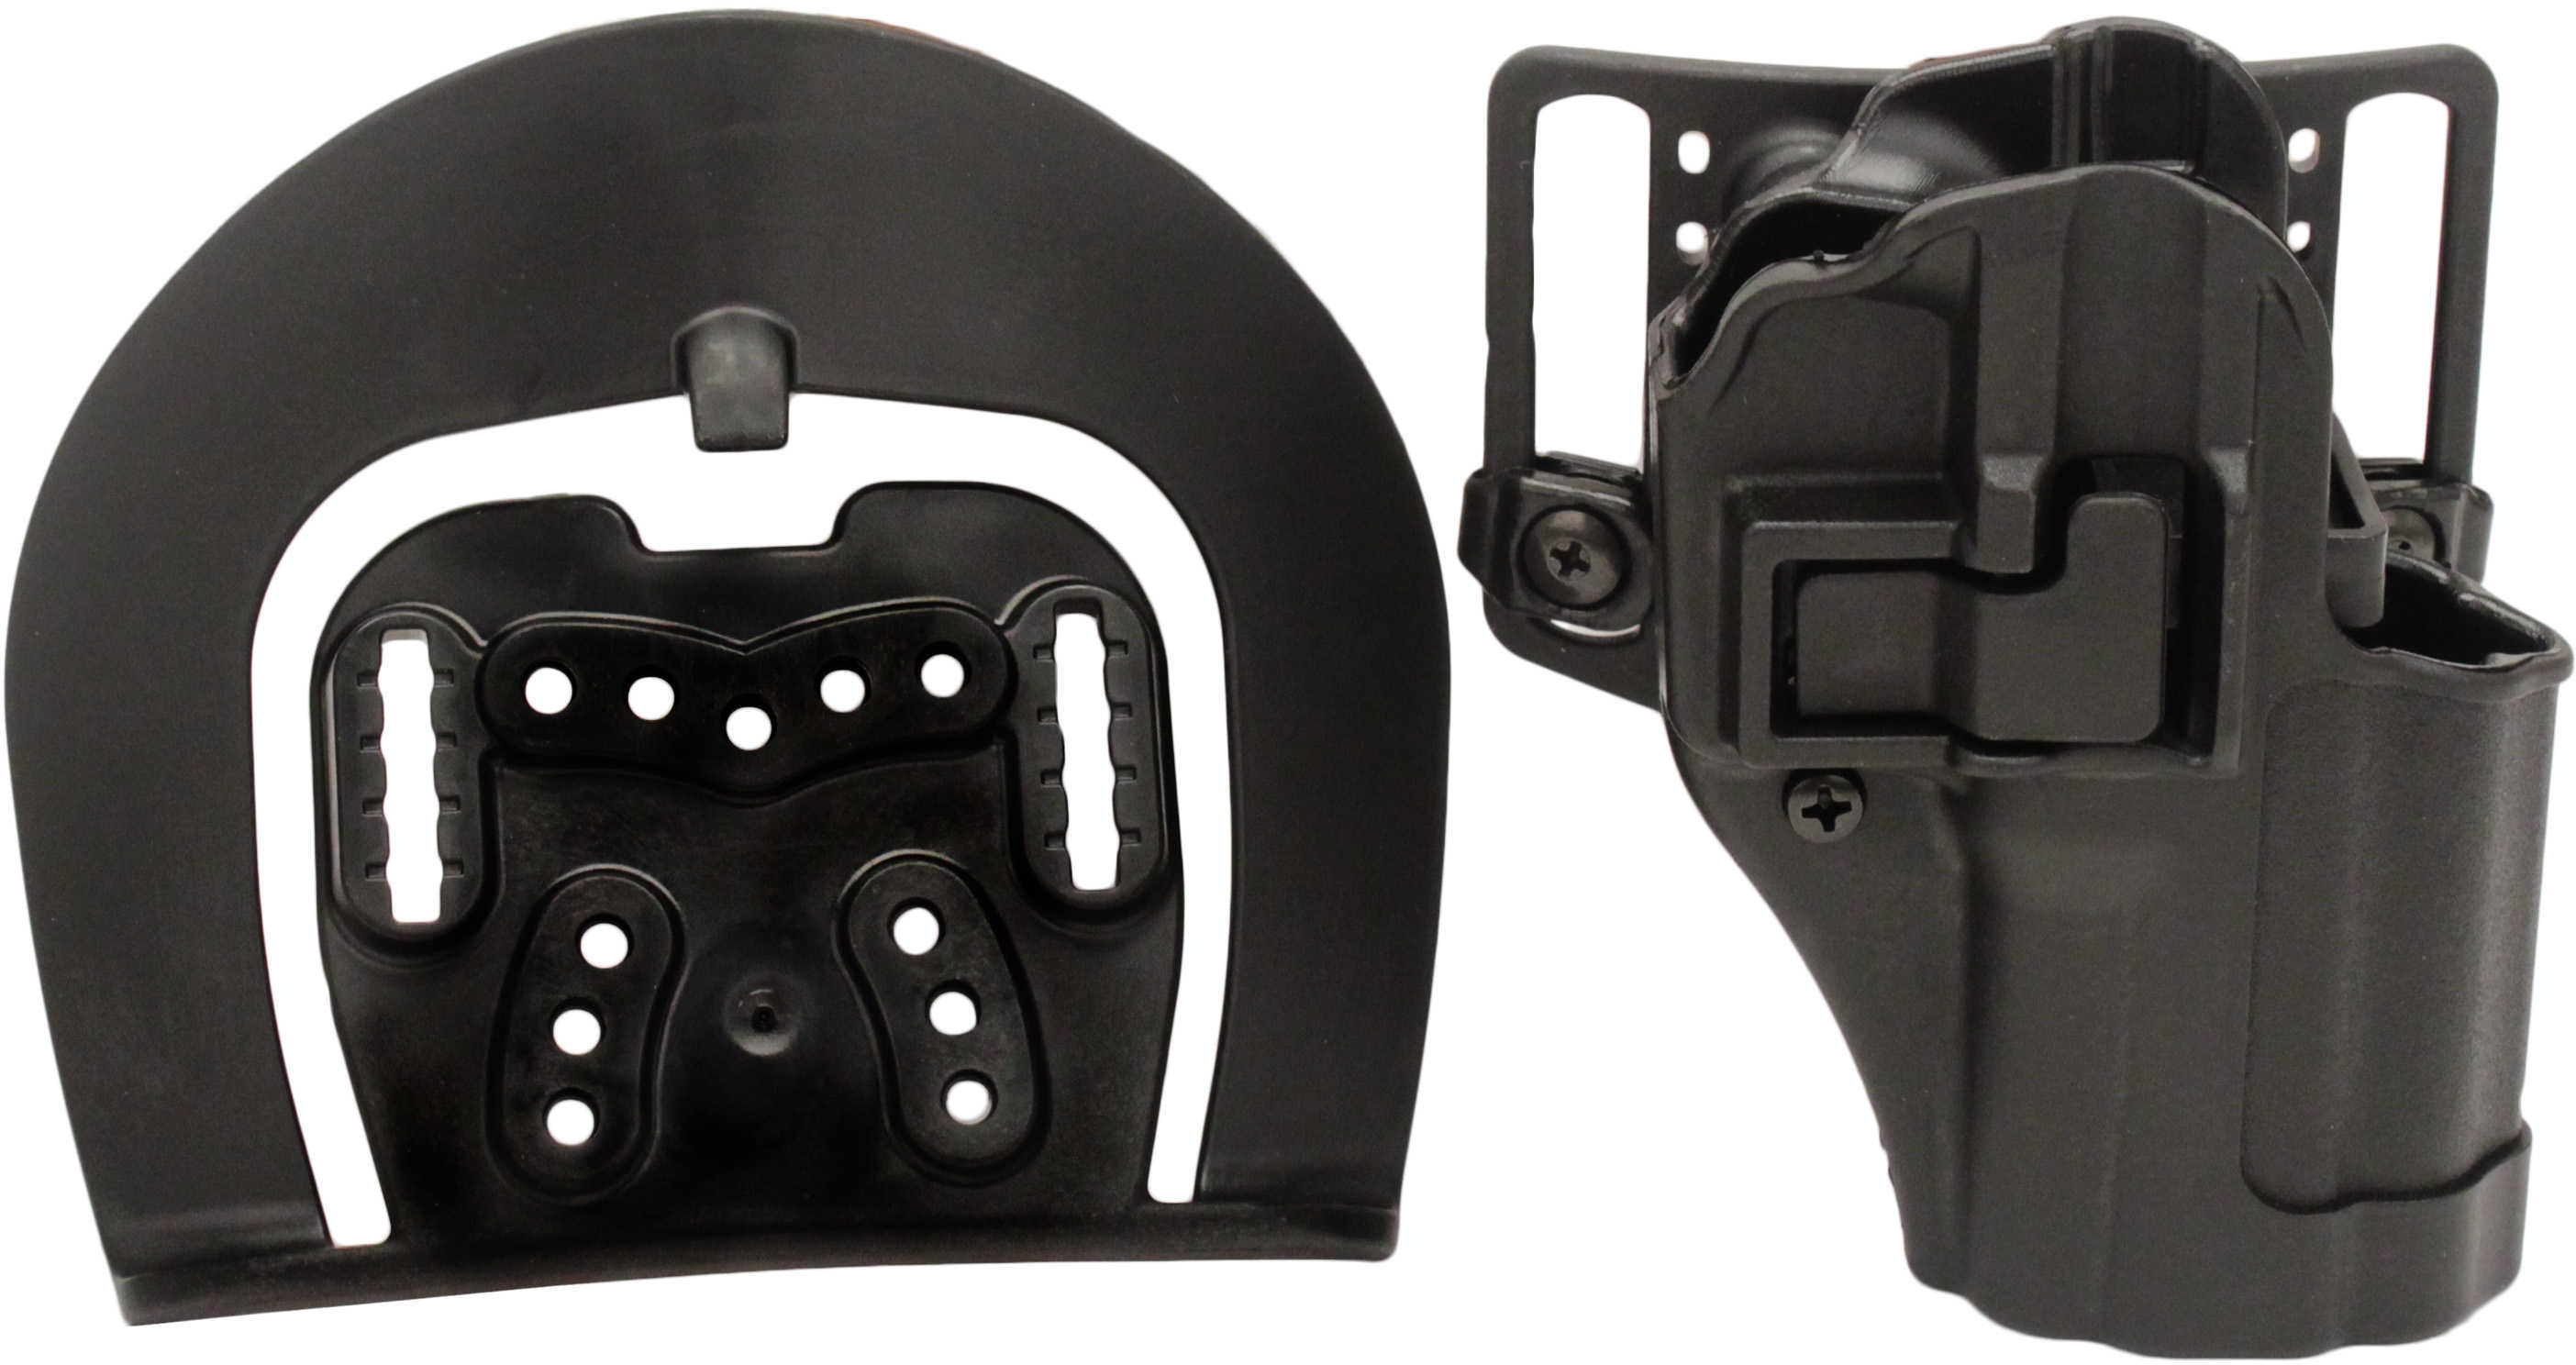 Blackhawk Serpa CQC Matte Holster W/Serpa Active Retention System Right Size 07: Springfield XD Compact & Service